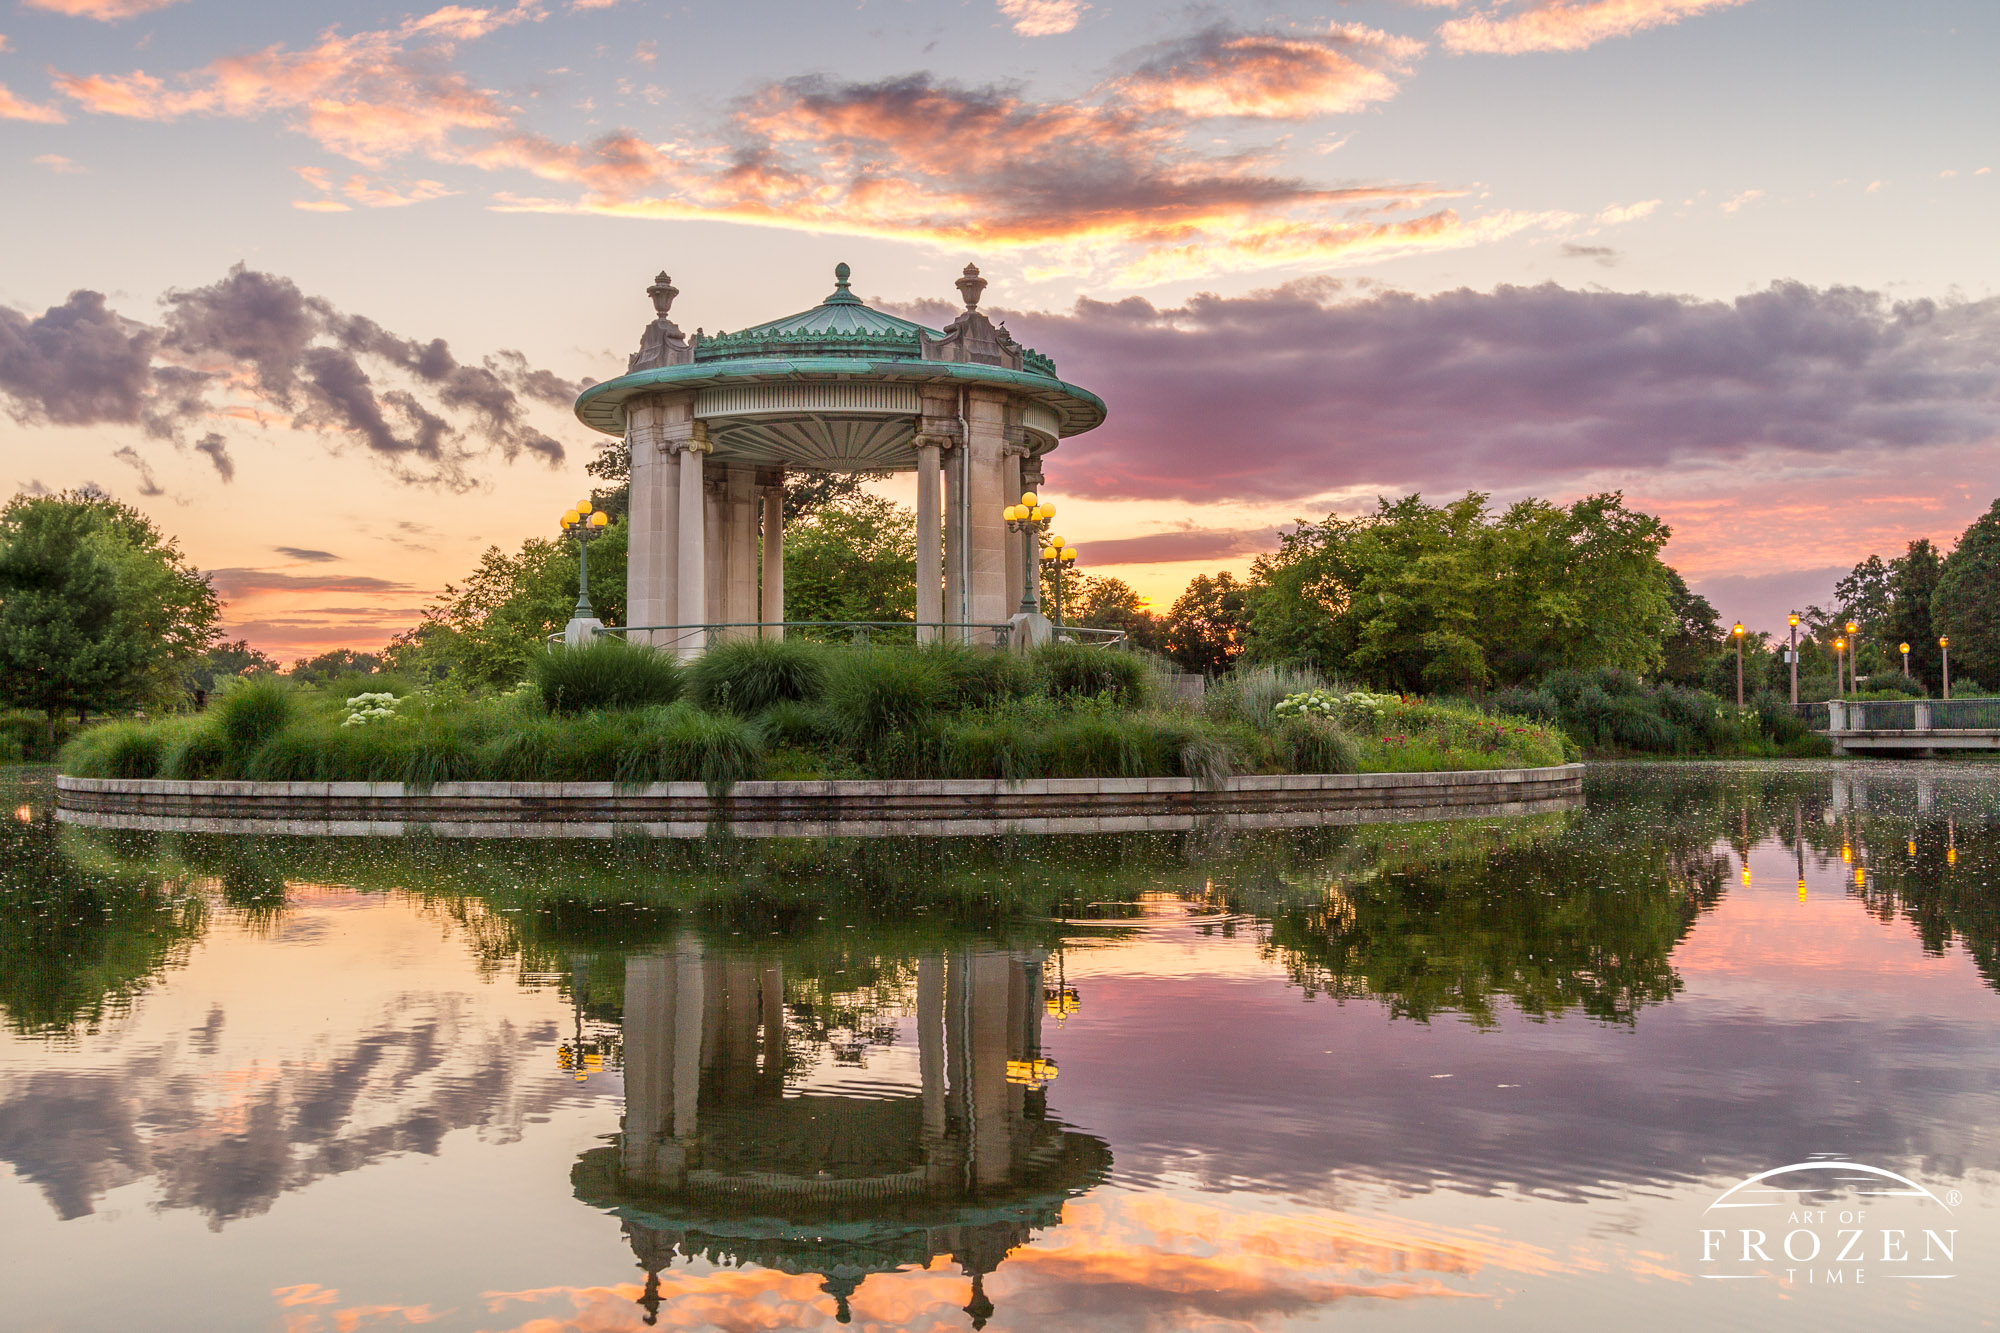 A colorful sunset over St Louis Forest Park, where pink and purple clouds hang over the Nathan Frank Bandstand while Pagoda Lake reflects the impressive sky